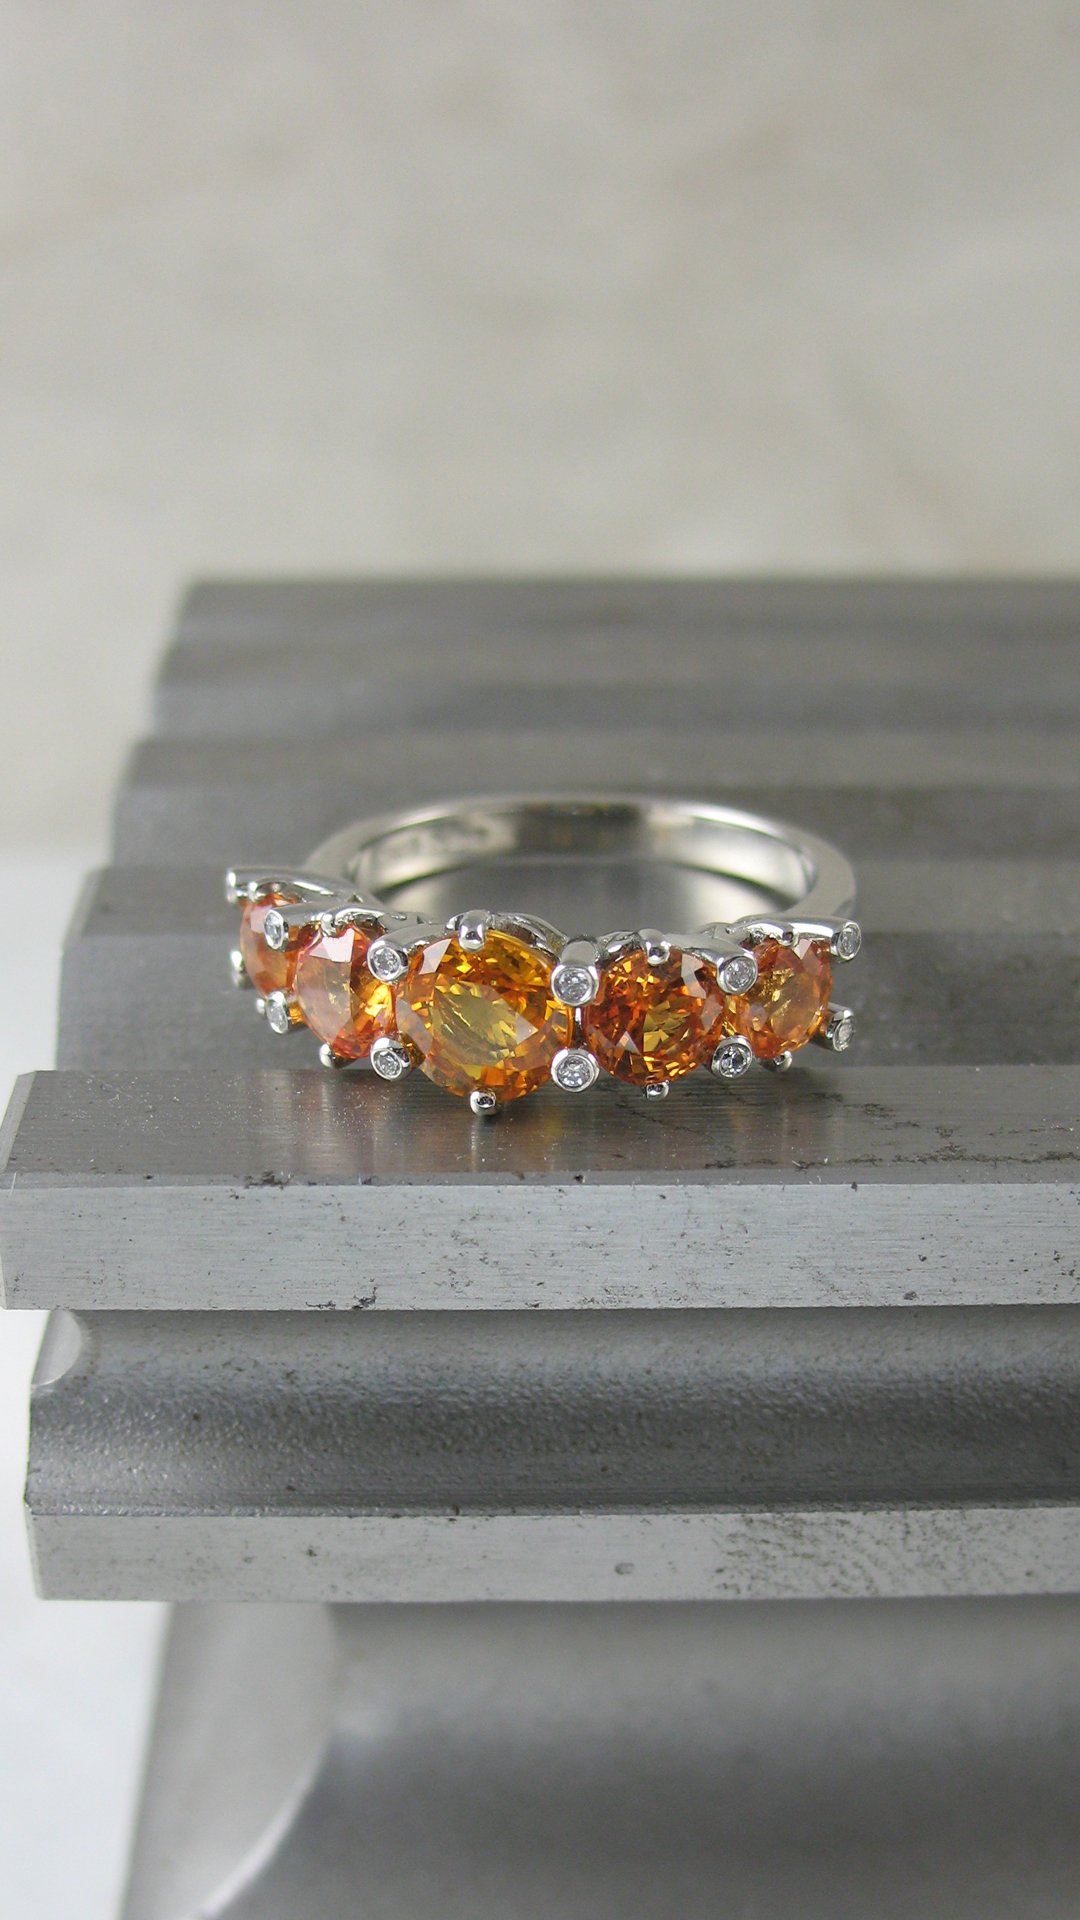 A captivating diamond and fiery orange sapphire engagement ring